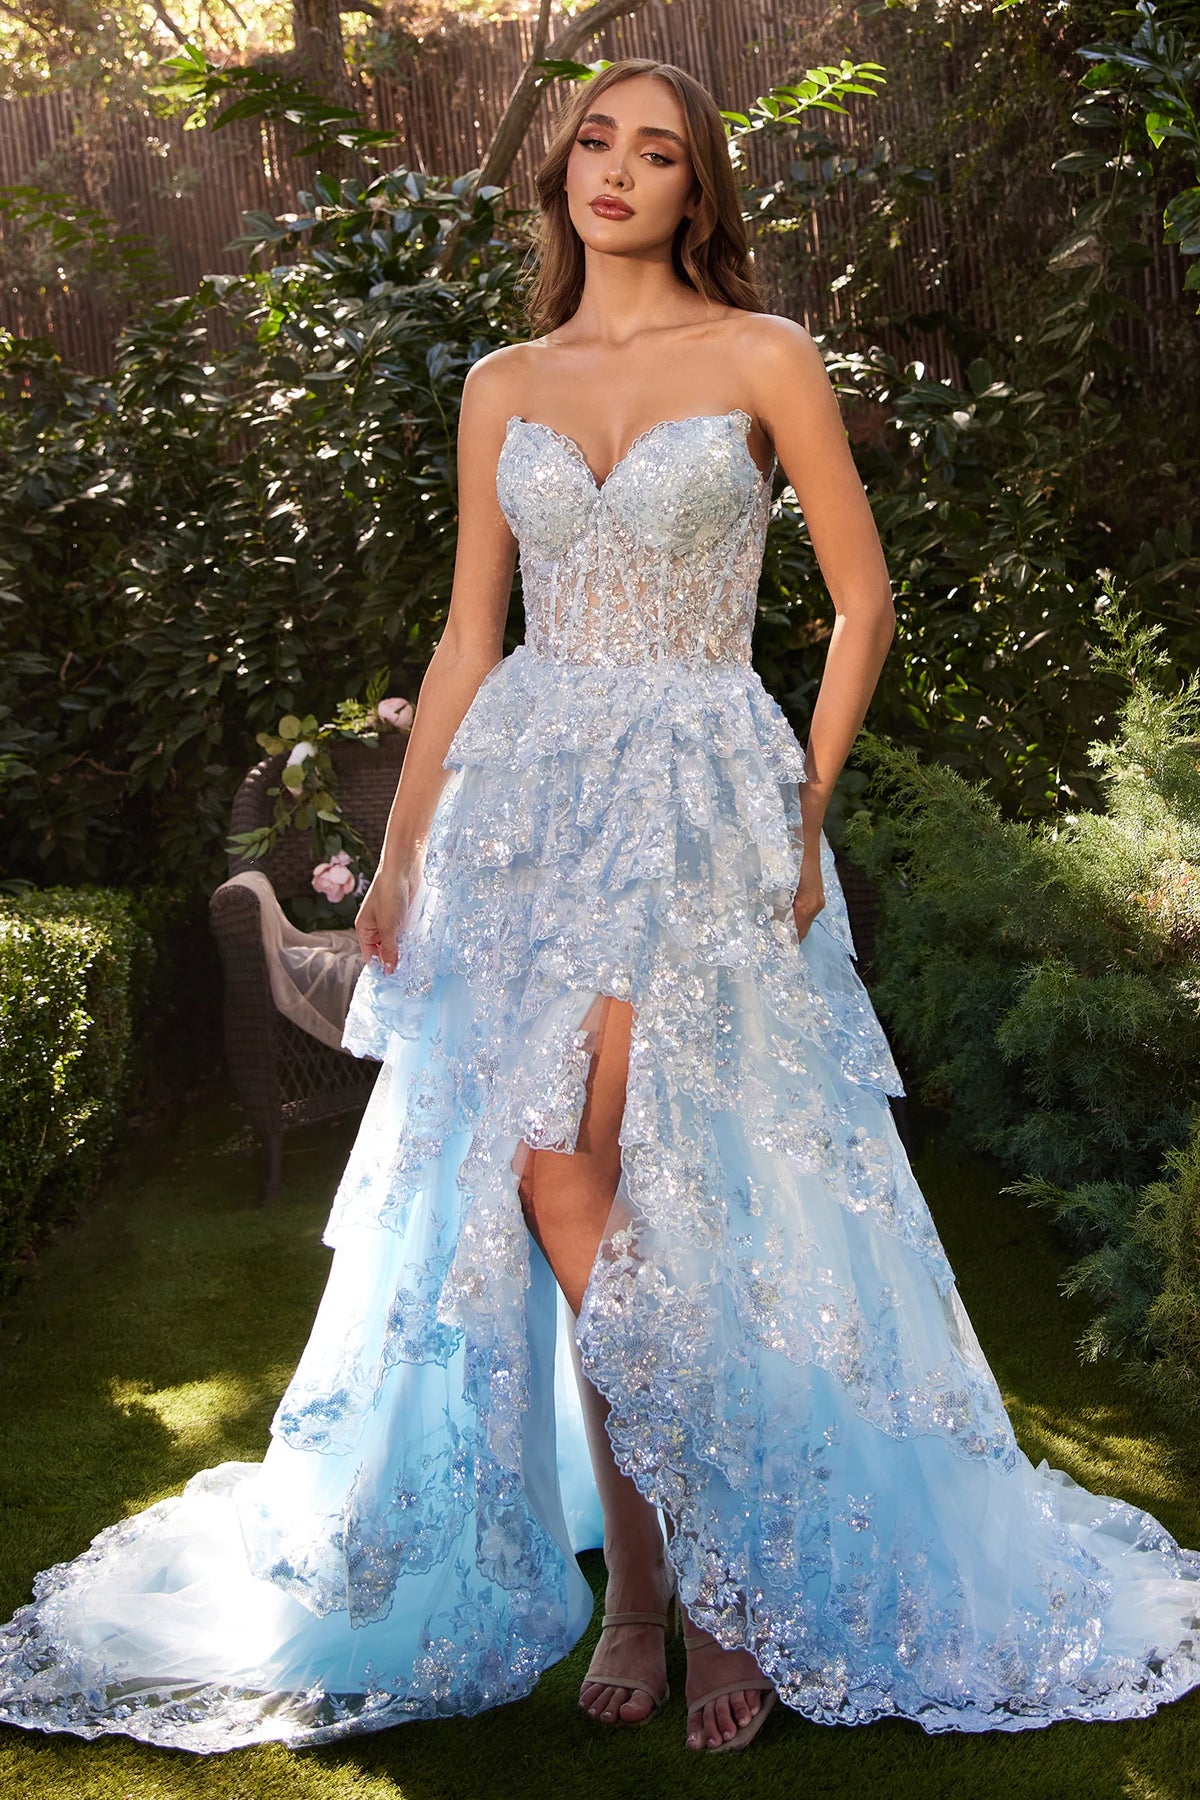 Andrea&Leo A1305 - A sparkling strapless A-line gown with tiered, layered skirt, sparkling scalloped lace hems, sheer boned bodice adorned with glistening sequins, and a lace-up corset back for a captivating look at prom.  The model is wearing the dress in light blue.